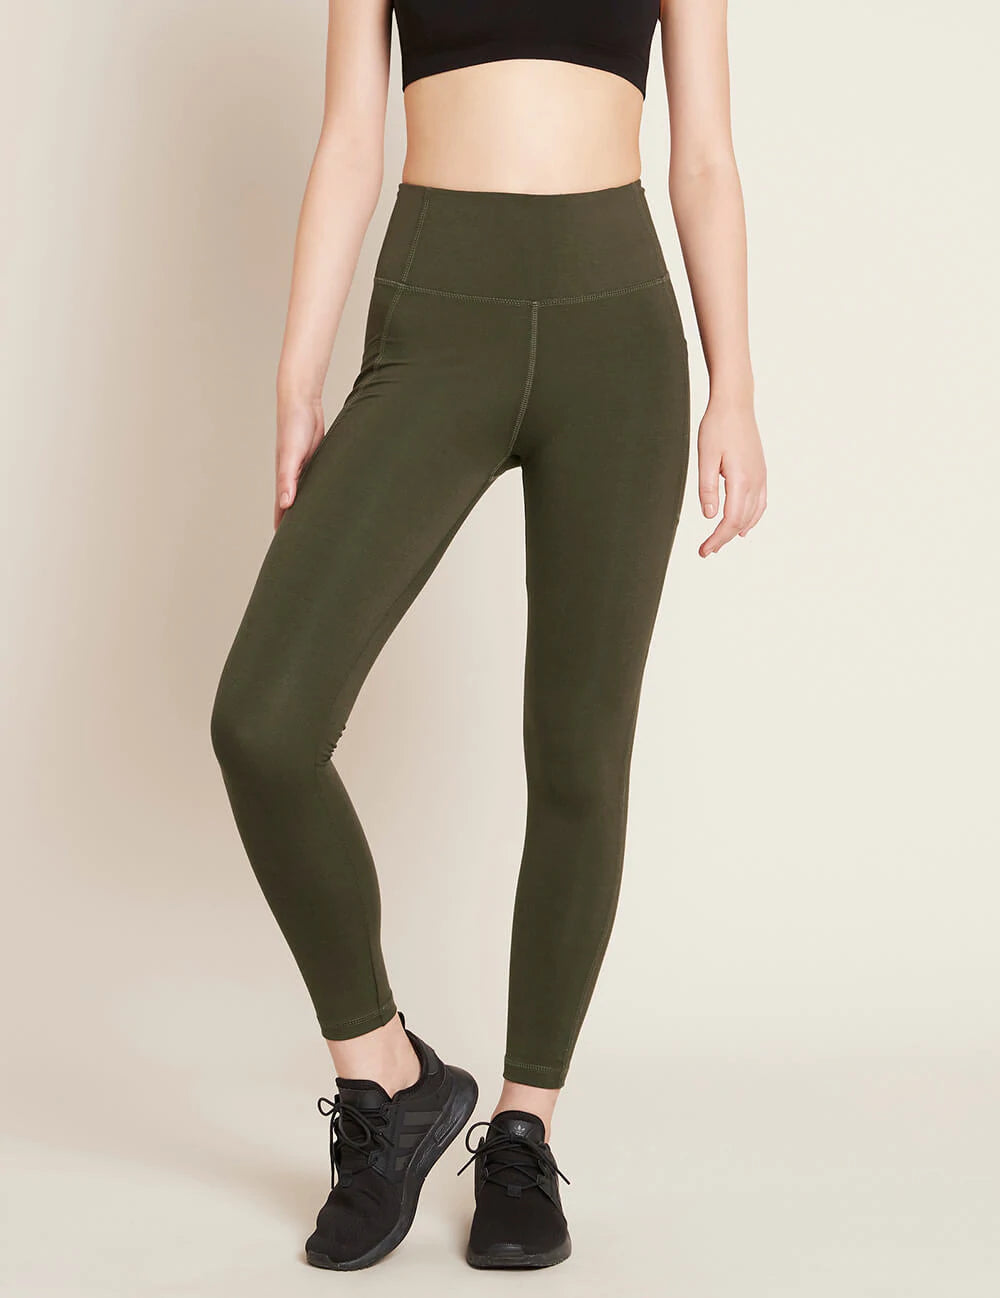 Boody Eco Wear Active Blended High-Waisted Full Leggings with